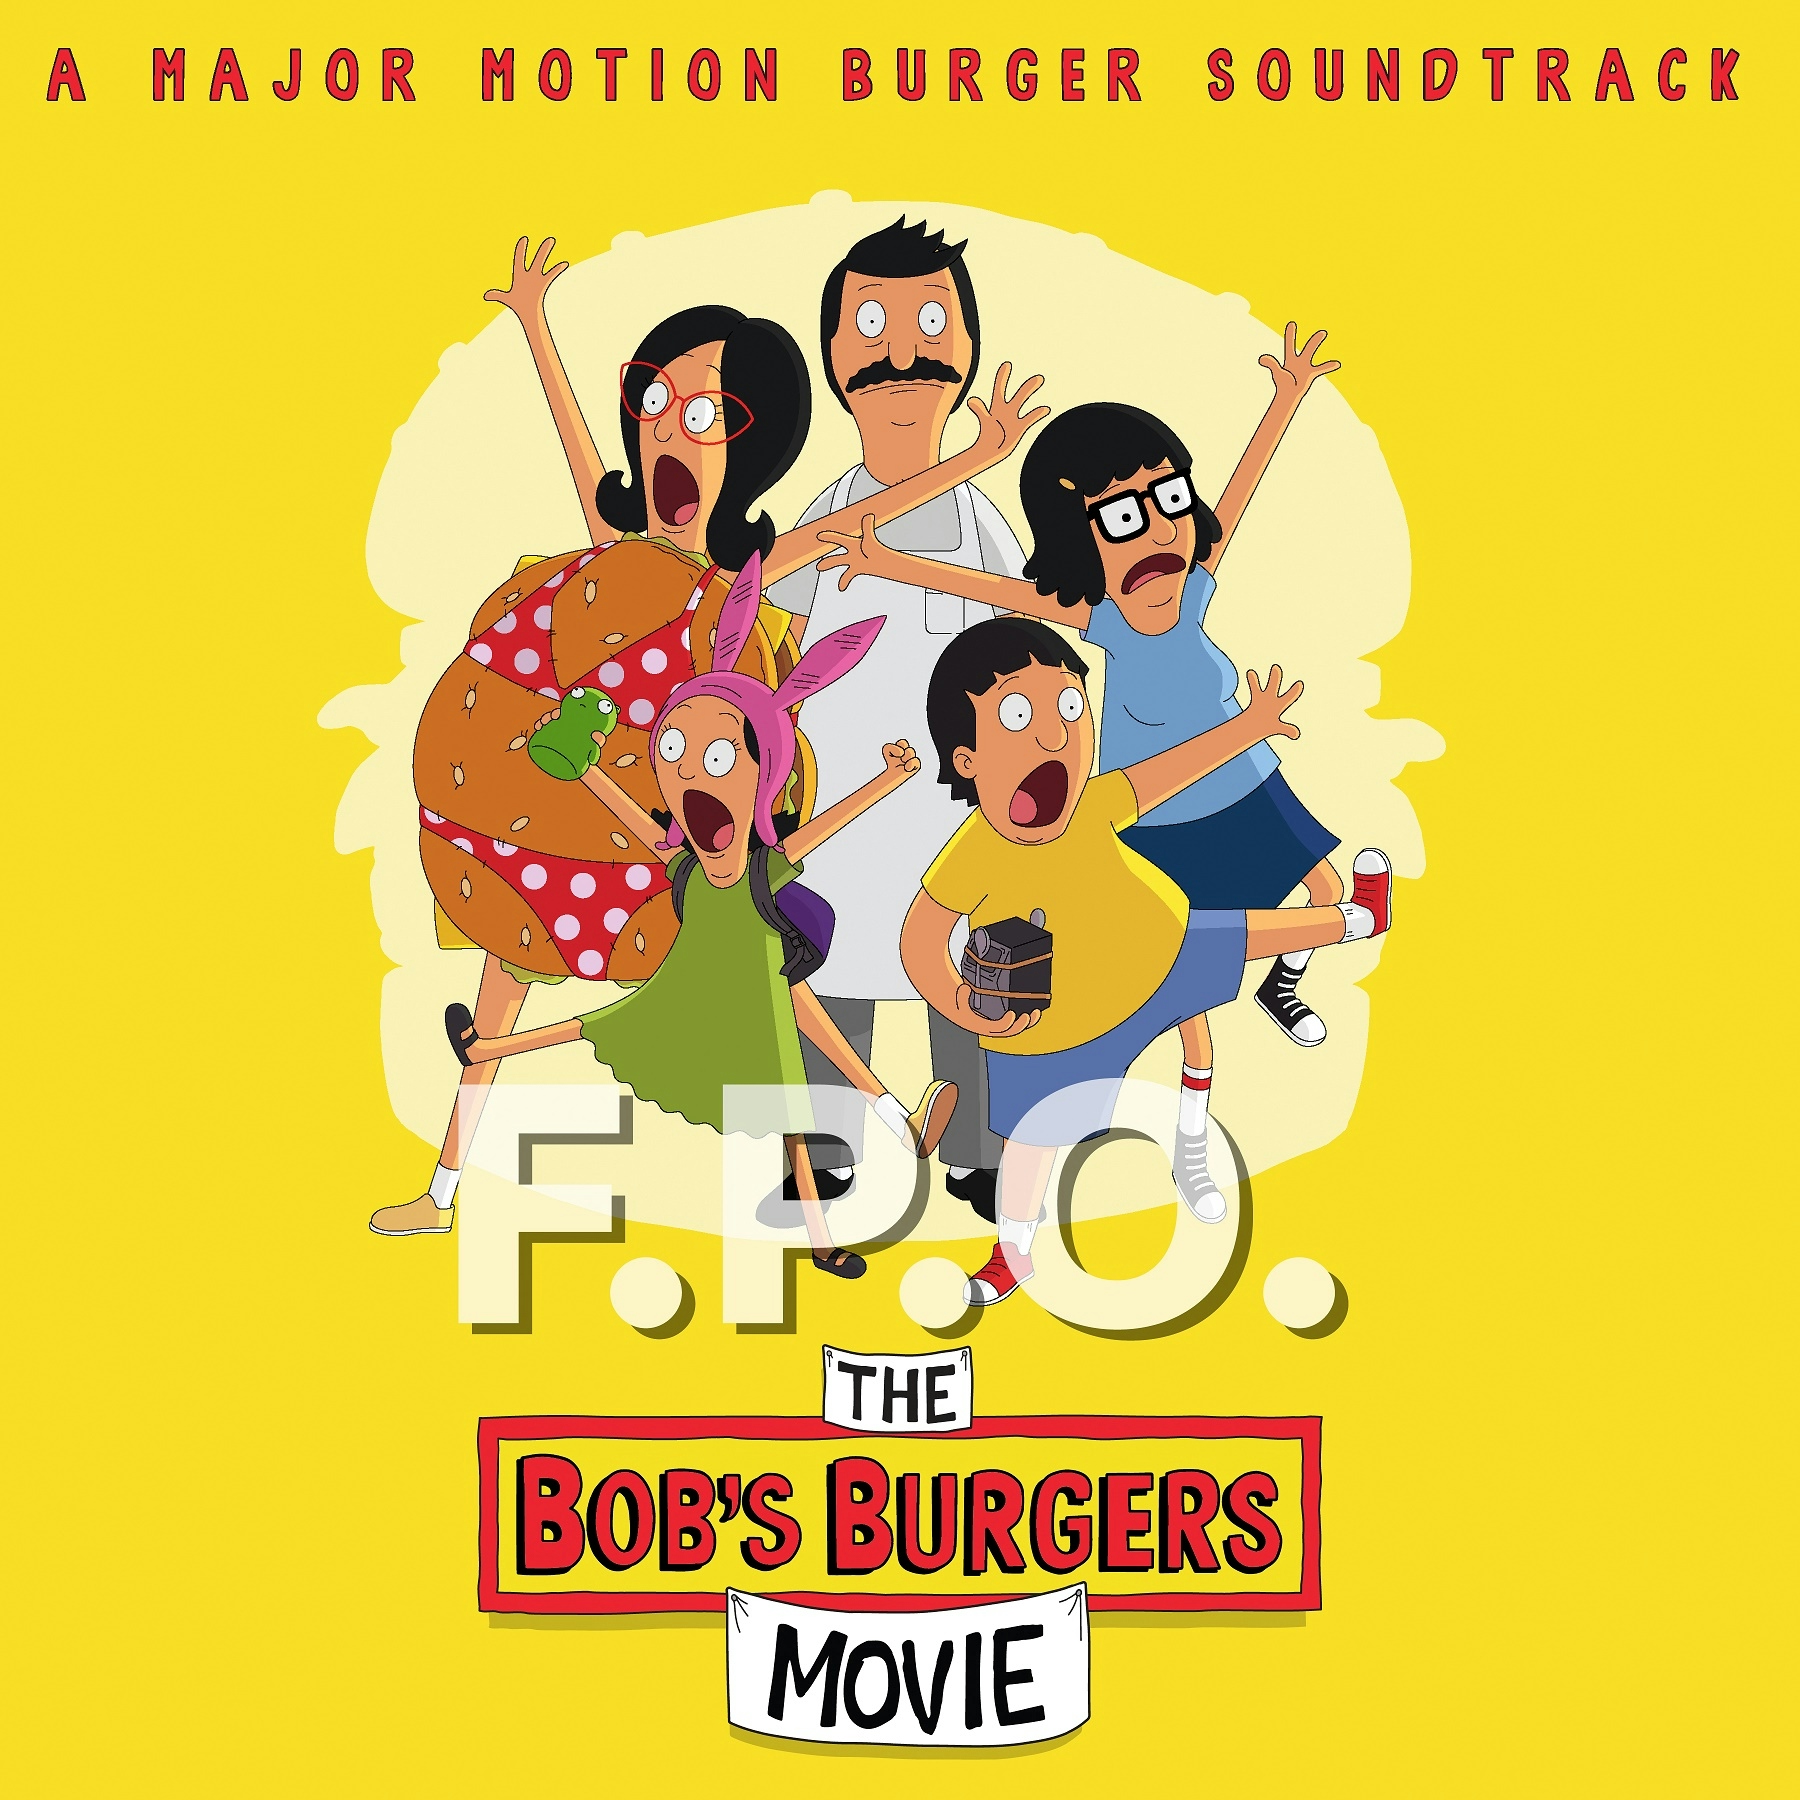 Album artwork for Album artwork for Music From The Bob's Burgers Movie by Various Artists by Music From The Bob's Burgers Movie - Various Artists